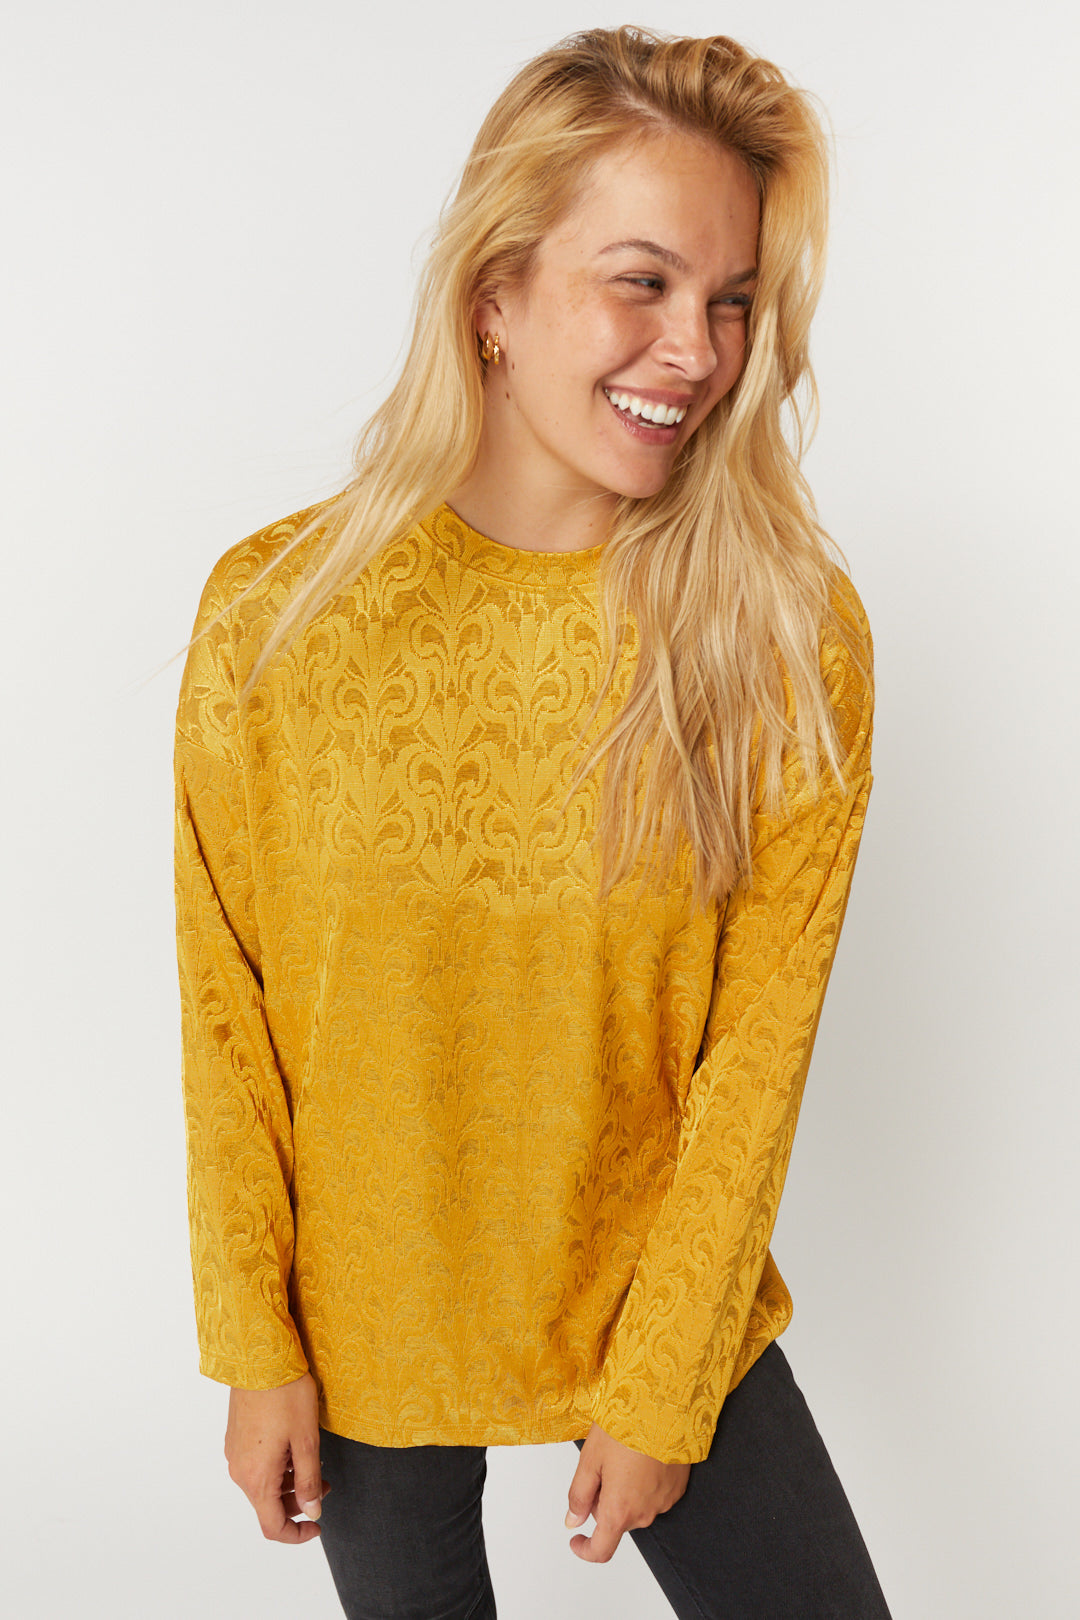 Yellow long-sleeved patterned sweater | Tulip